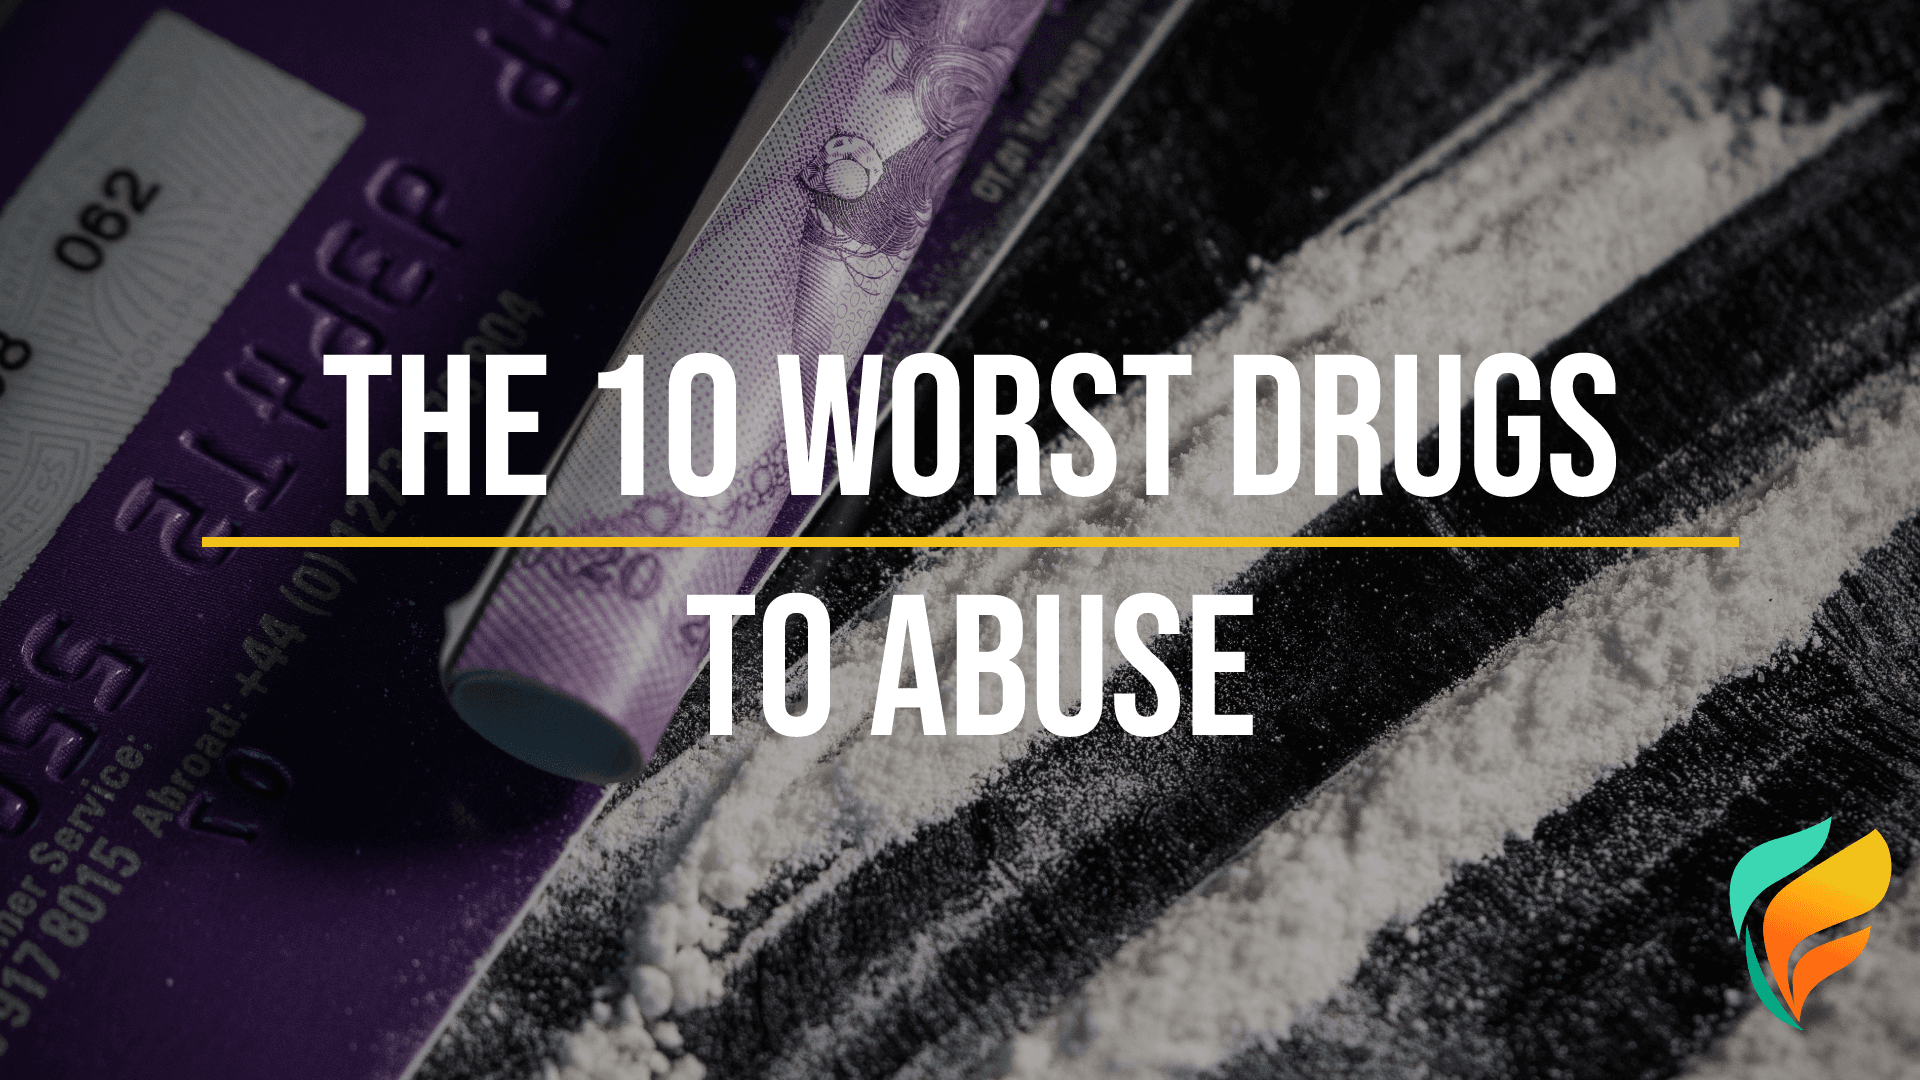 The 10 Worst Drugs to Abuse